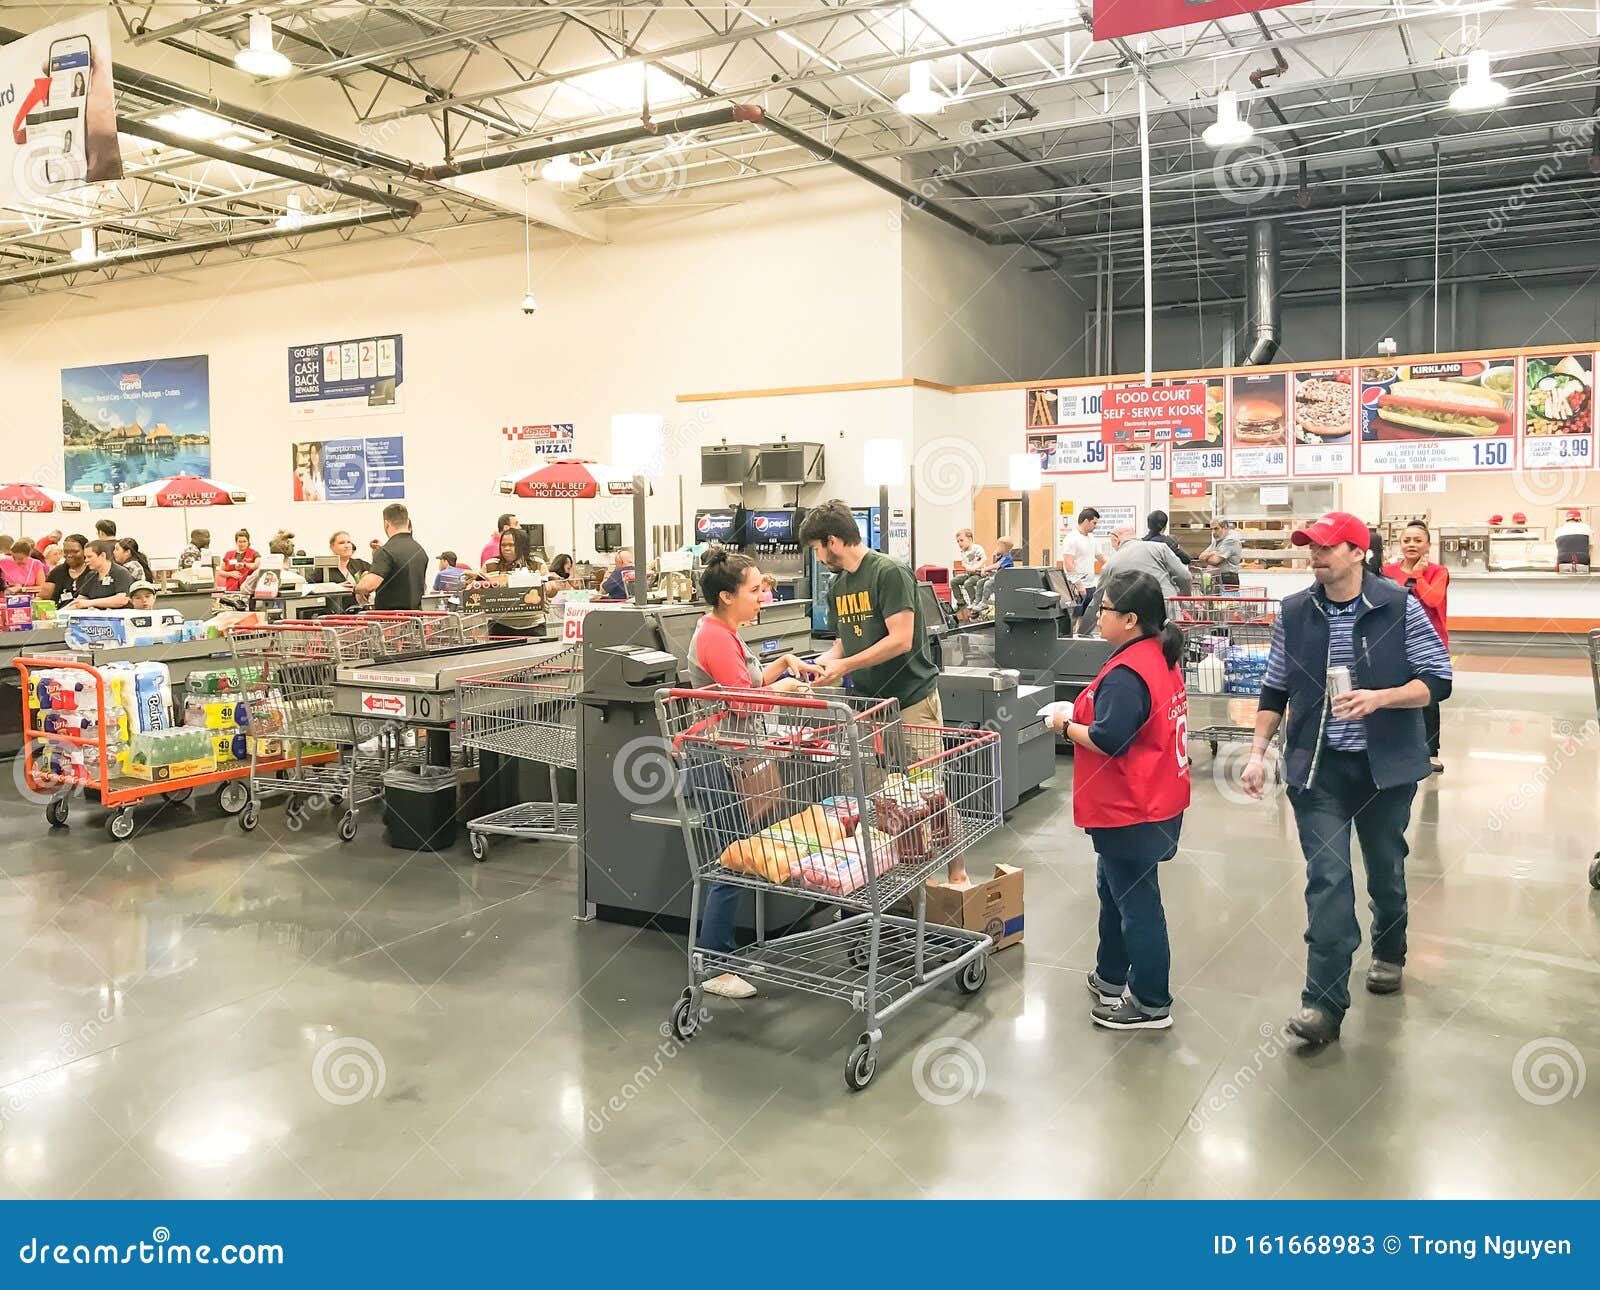 Self-checkout Kiosks Area With Support Staff In Red Uniform At Costco In Churchill Way, Dallas ...